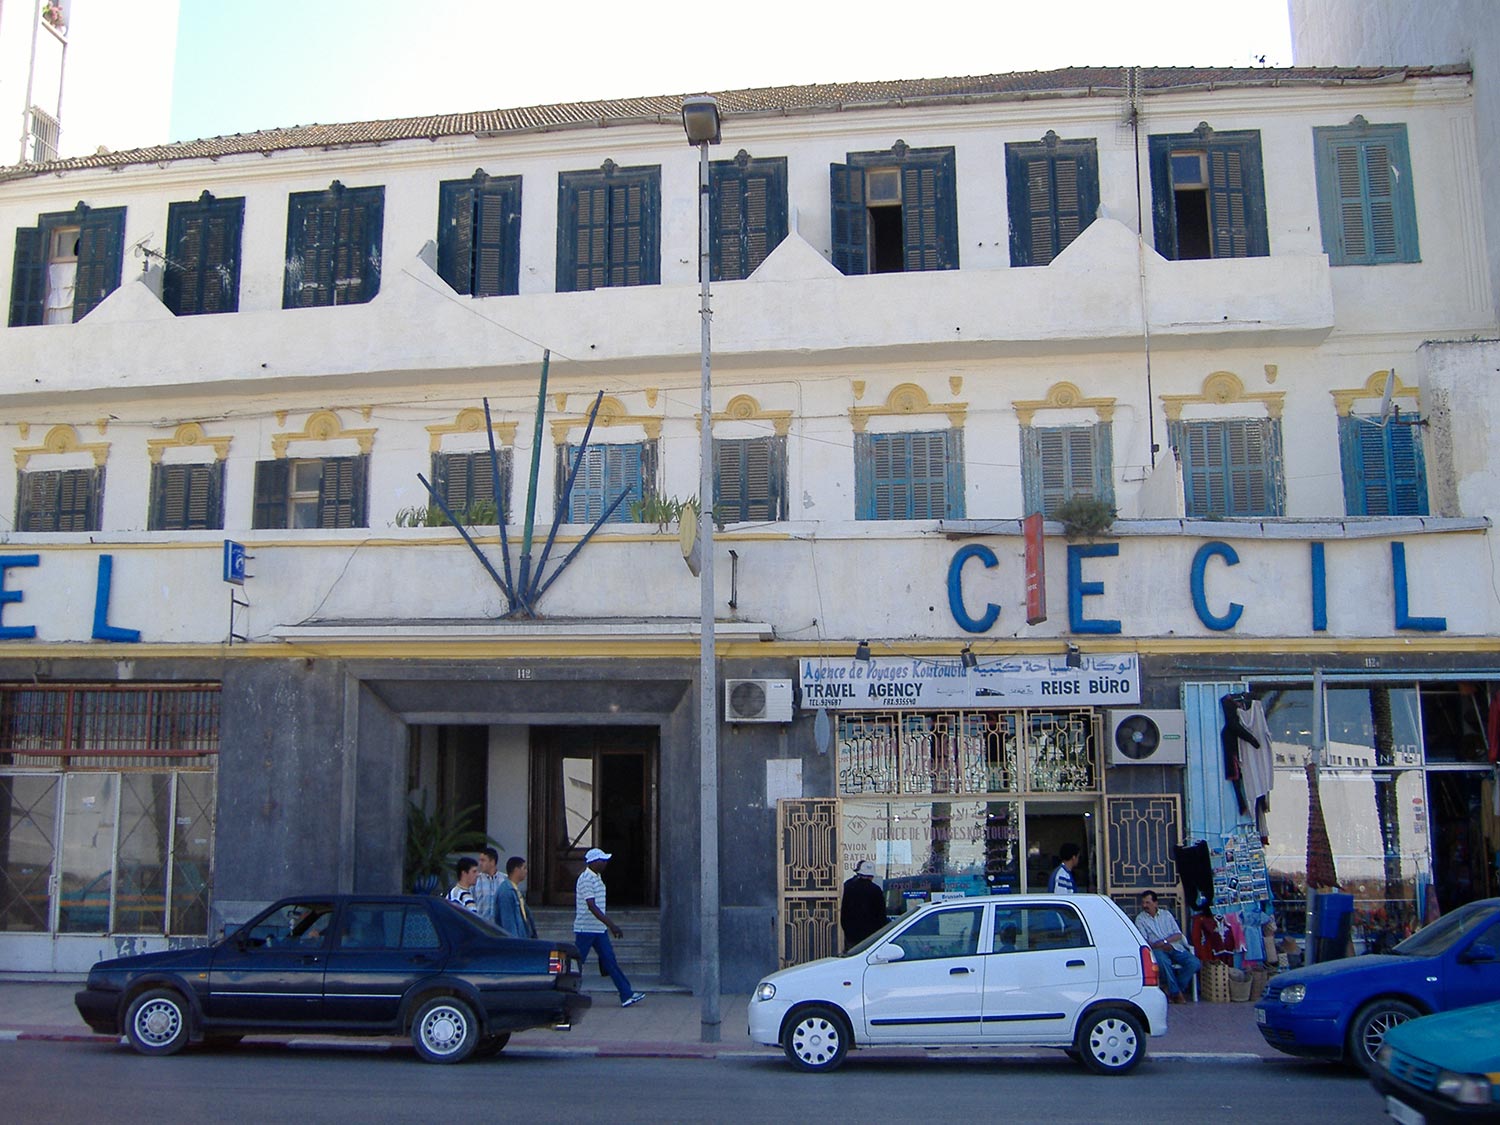 View of the facade before demolition